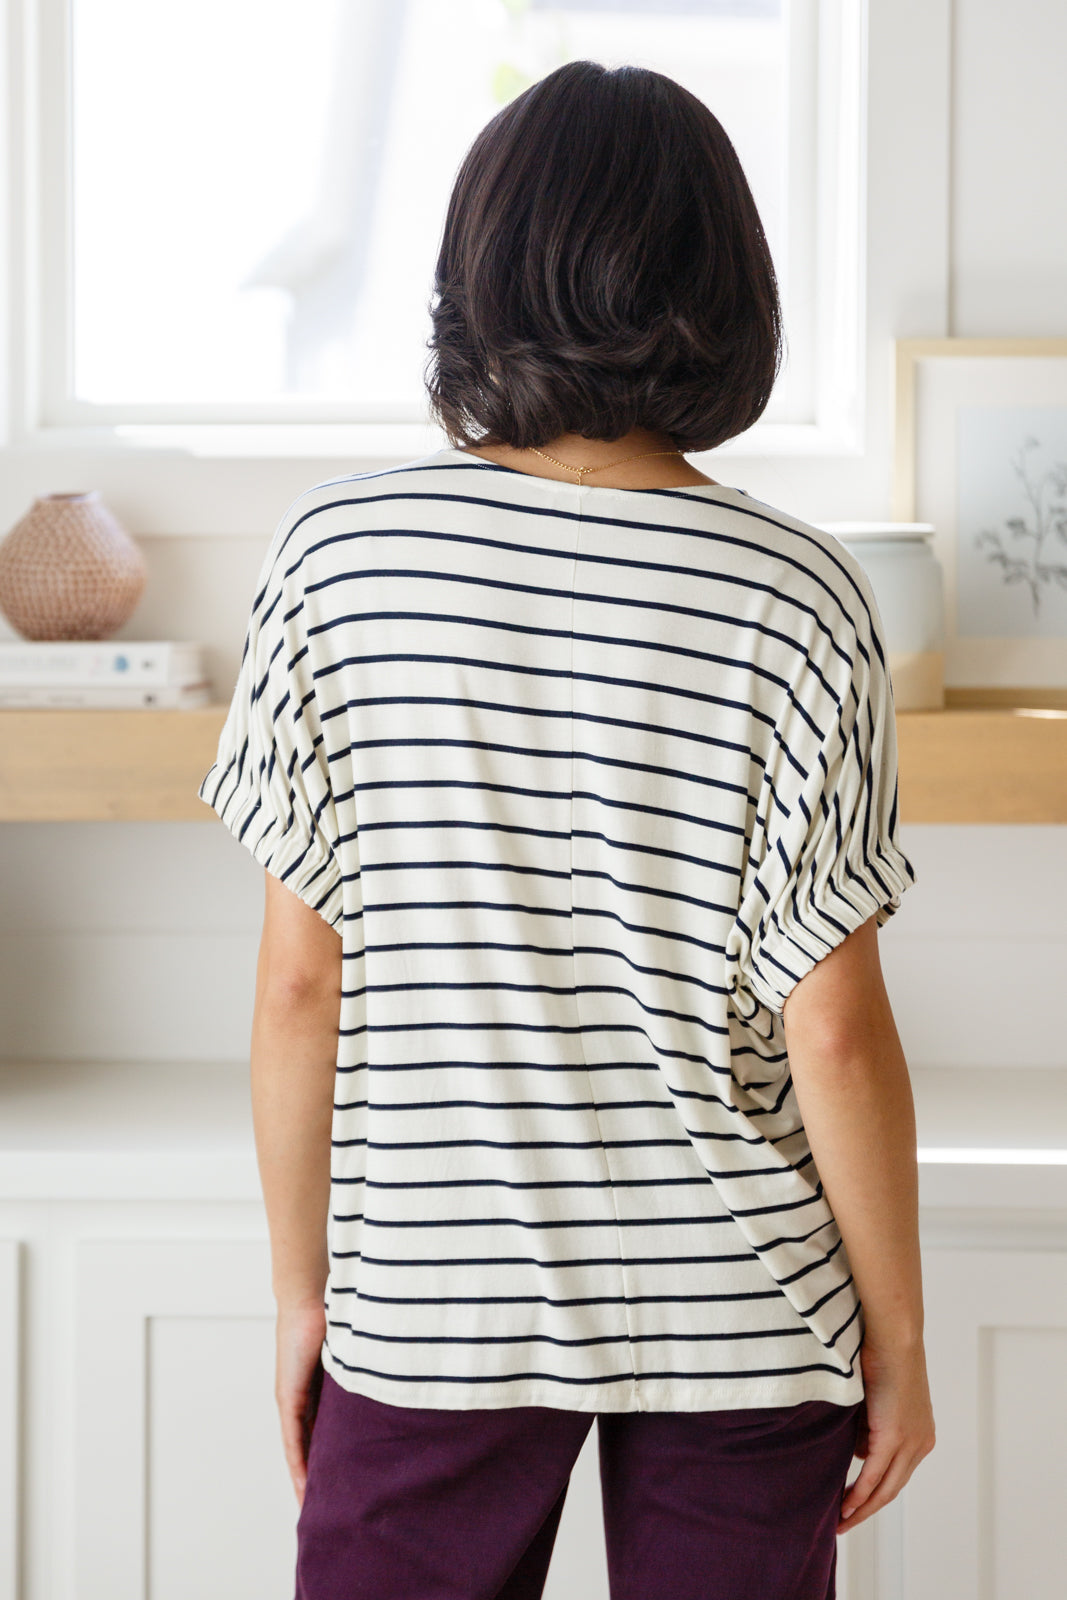 Much Ado About Nothing Striped Top - Lola Cerina Boutique